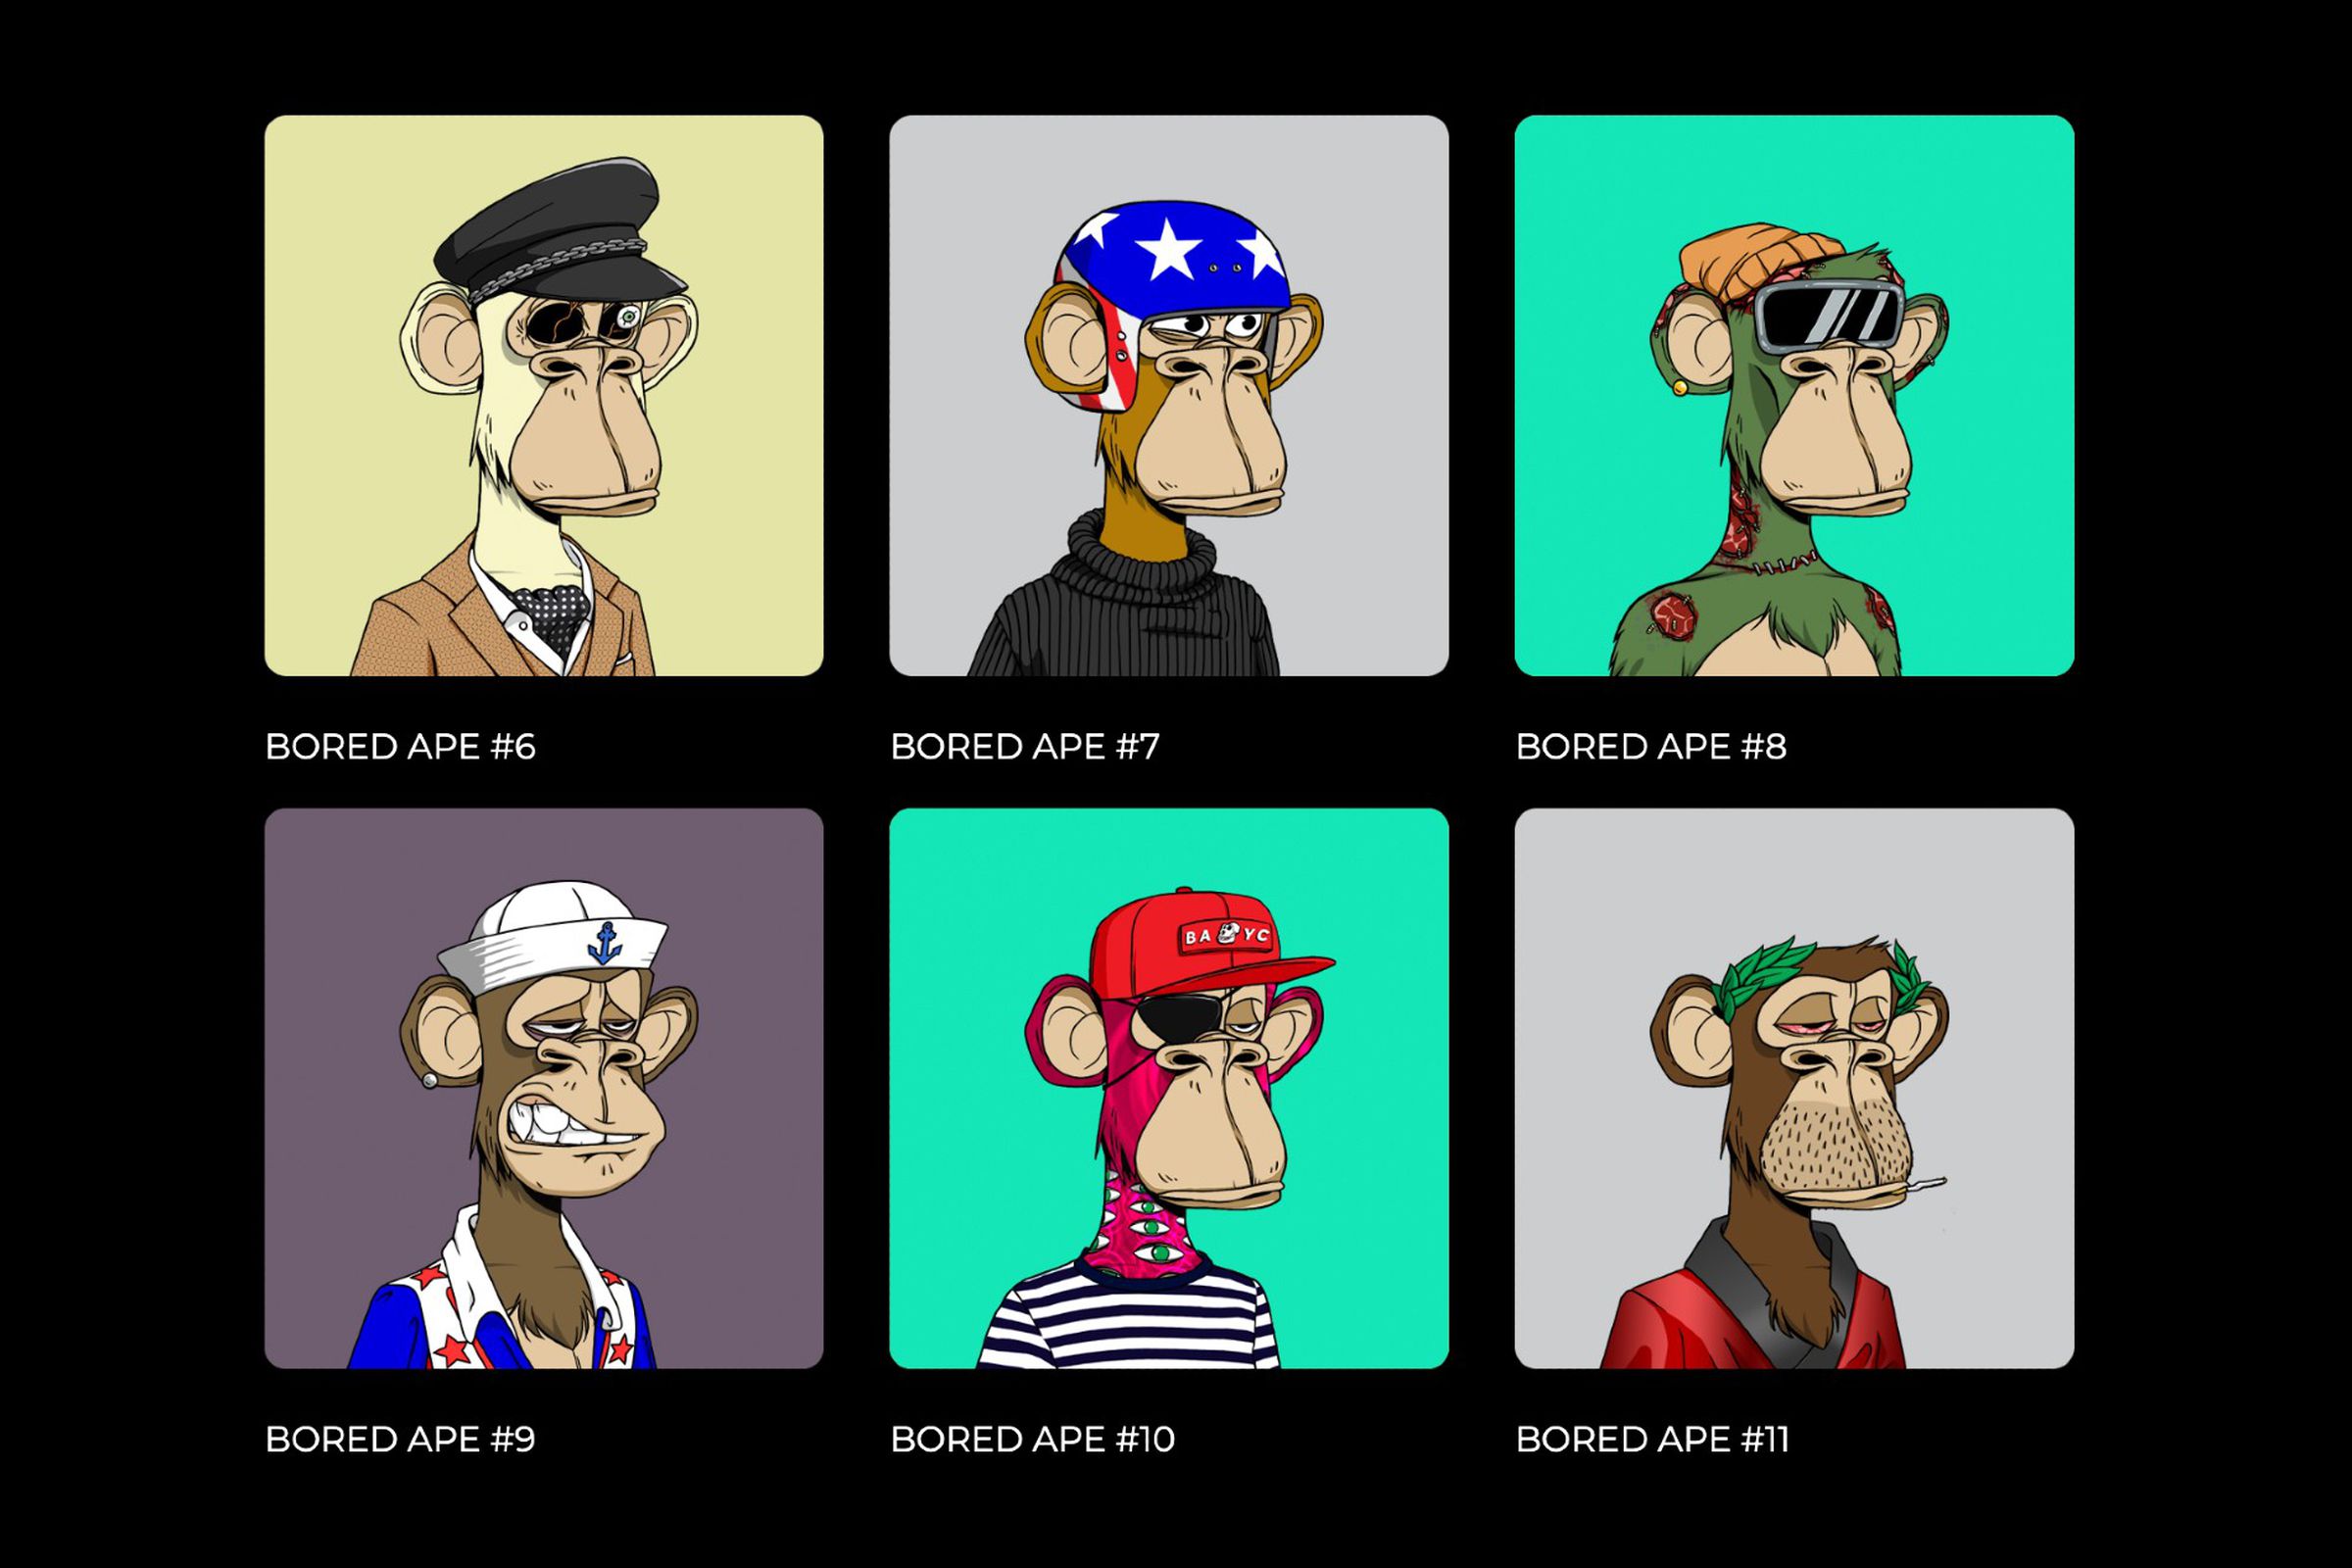 An image showing a gallery of Bored Apes